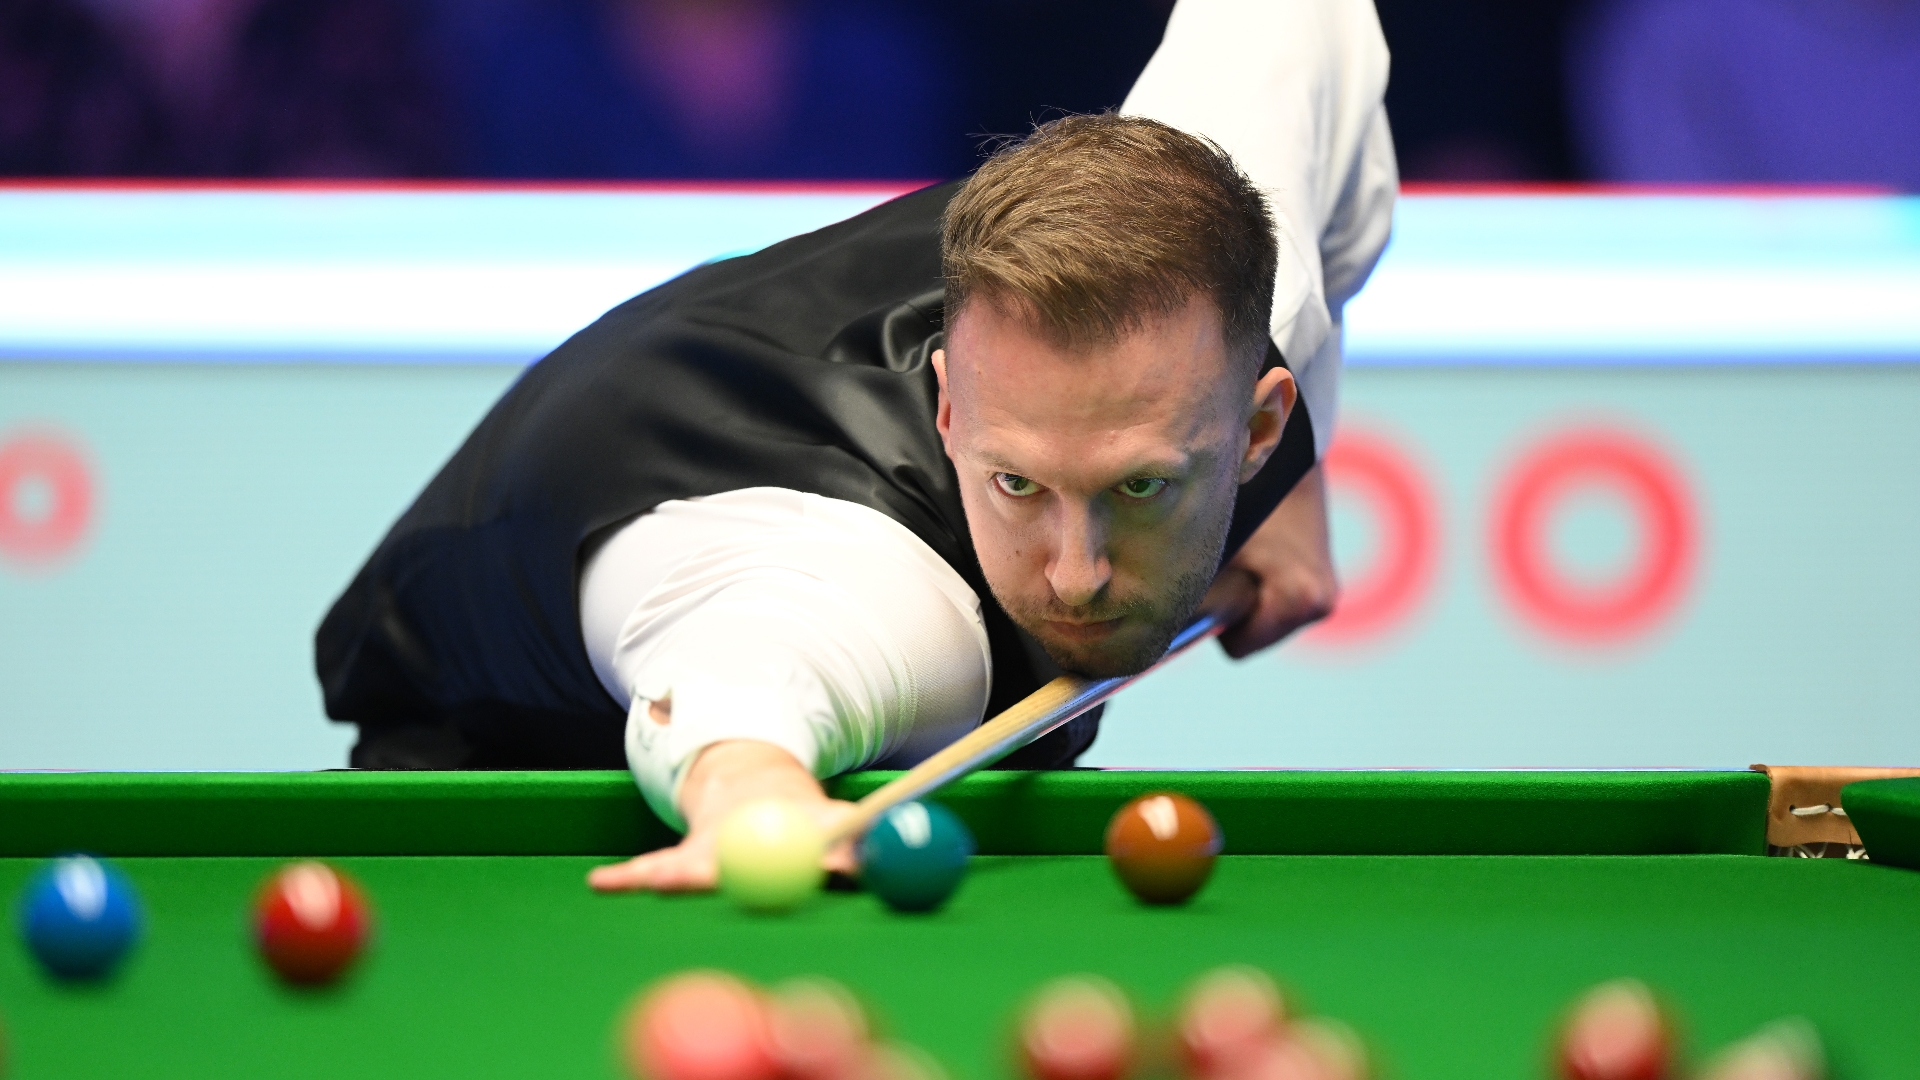 Mark Williams vs Judd Trump Masters Snooker Final is streamed live now